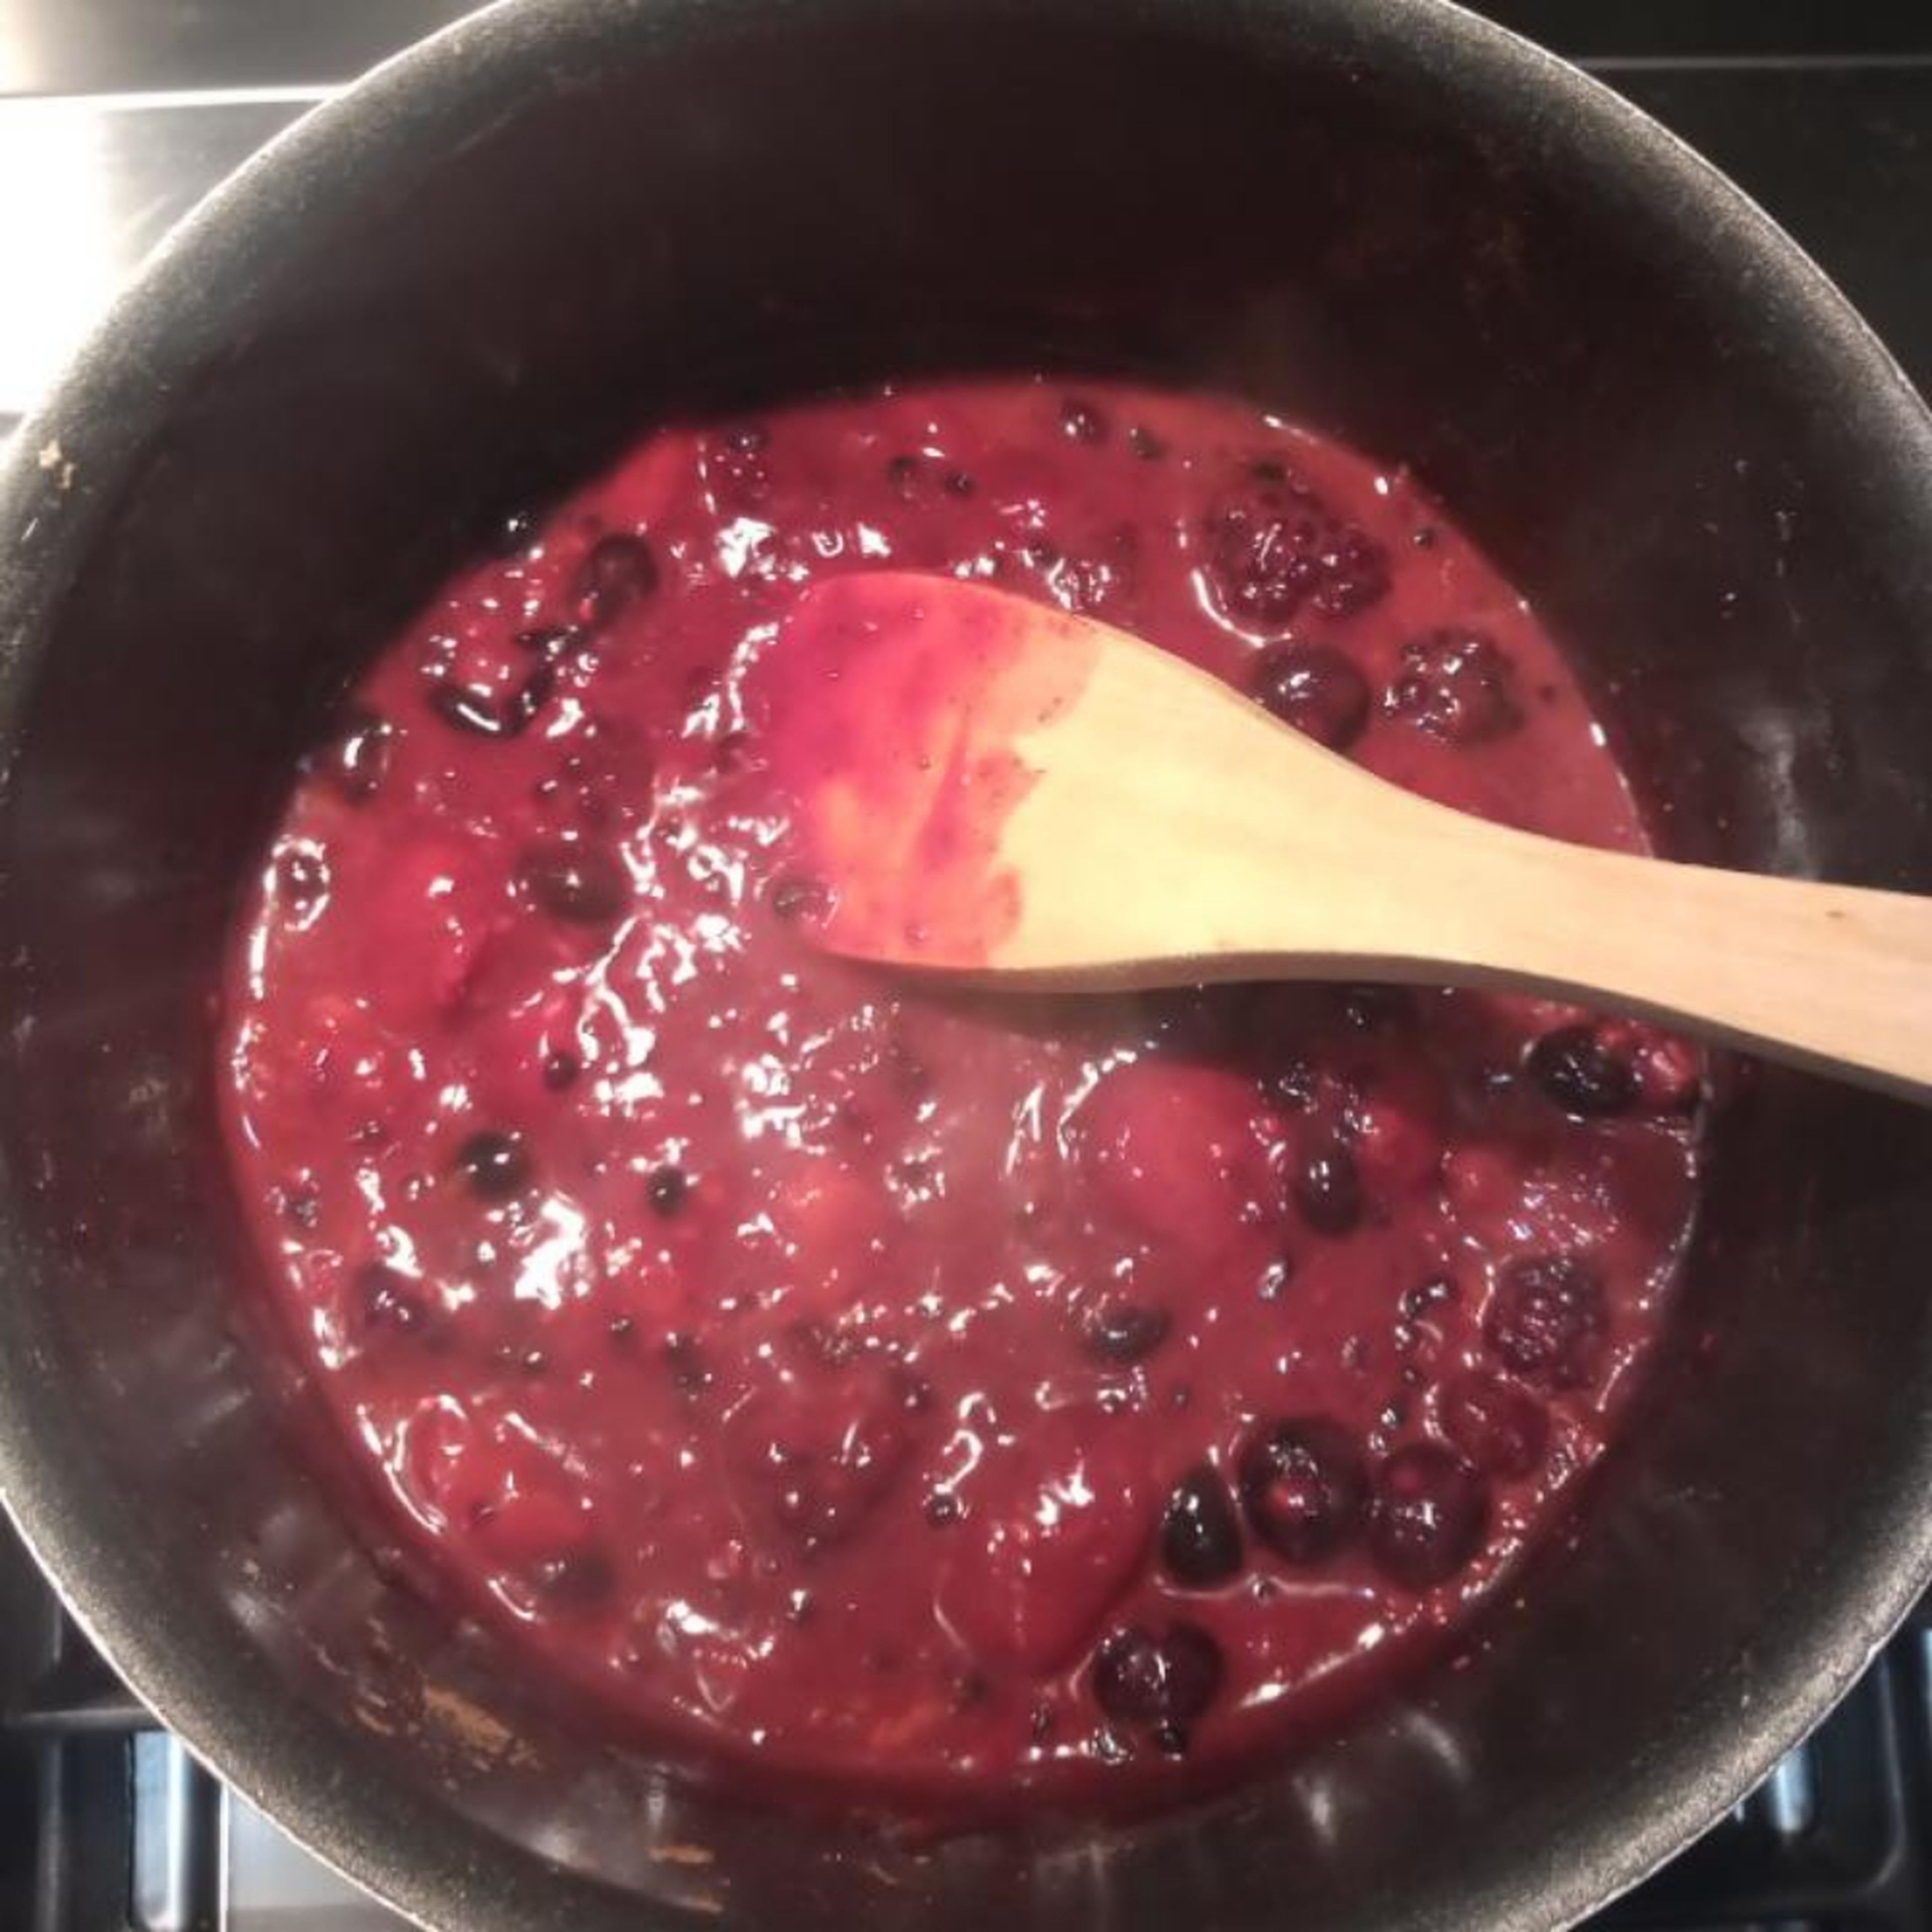 Start to make berry cinnamon puree. Place frozen mixed berries, sugar, cinnamon, vanilla extract and water in a saucepan over medium heat. Cook, stirring, for 3-4 minutes or until sugar has dissolved